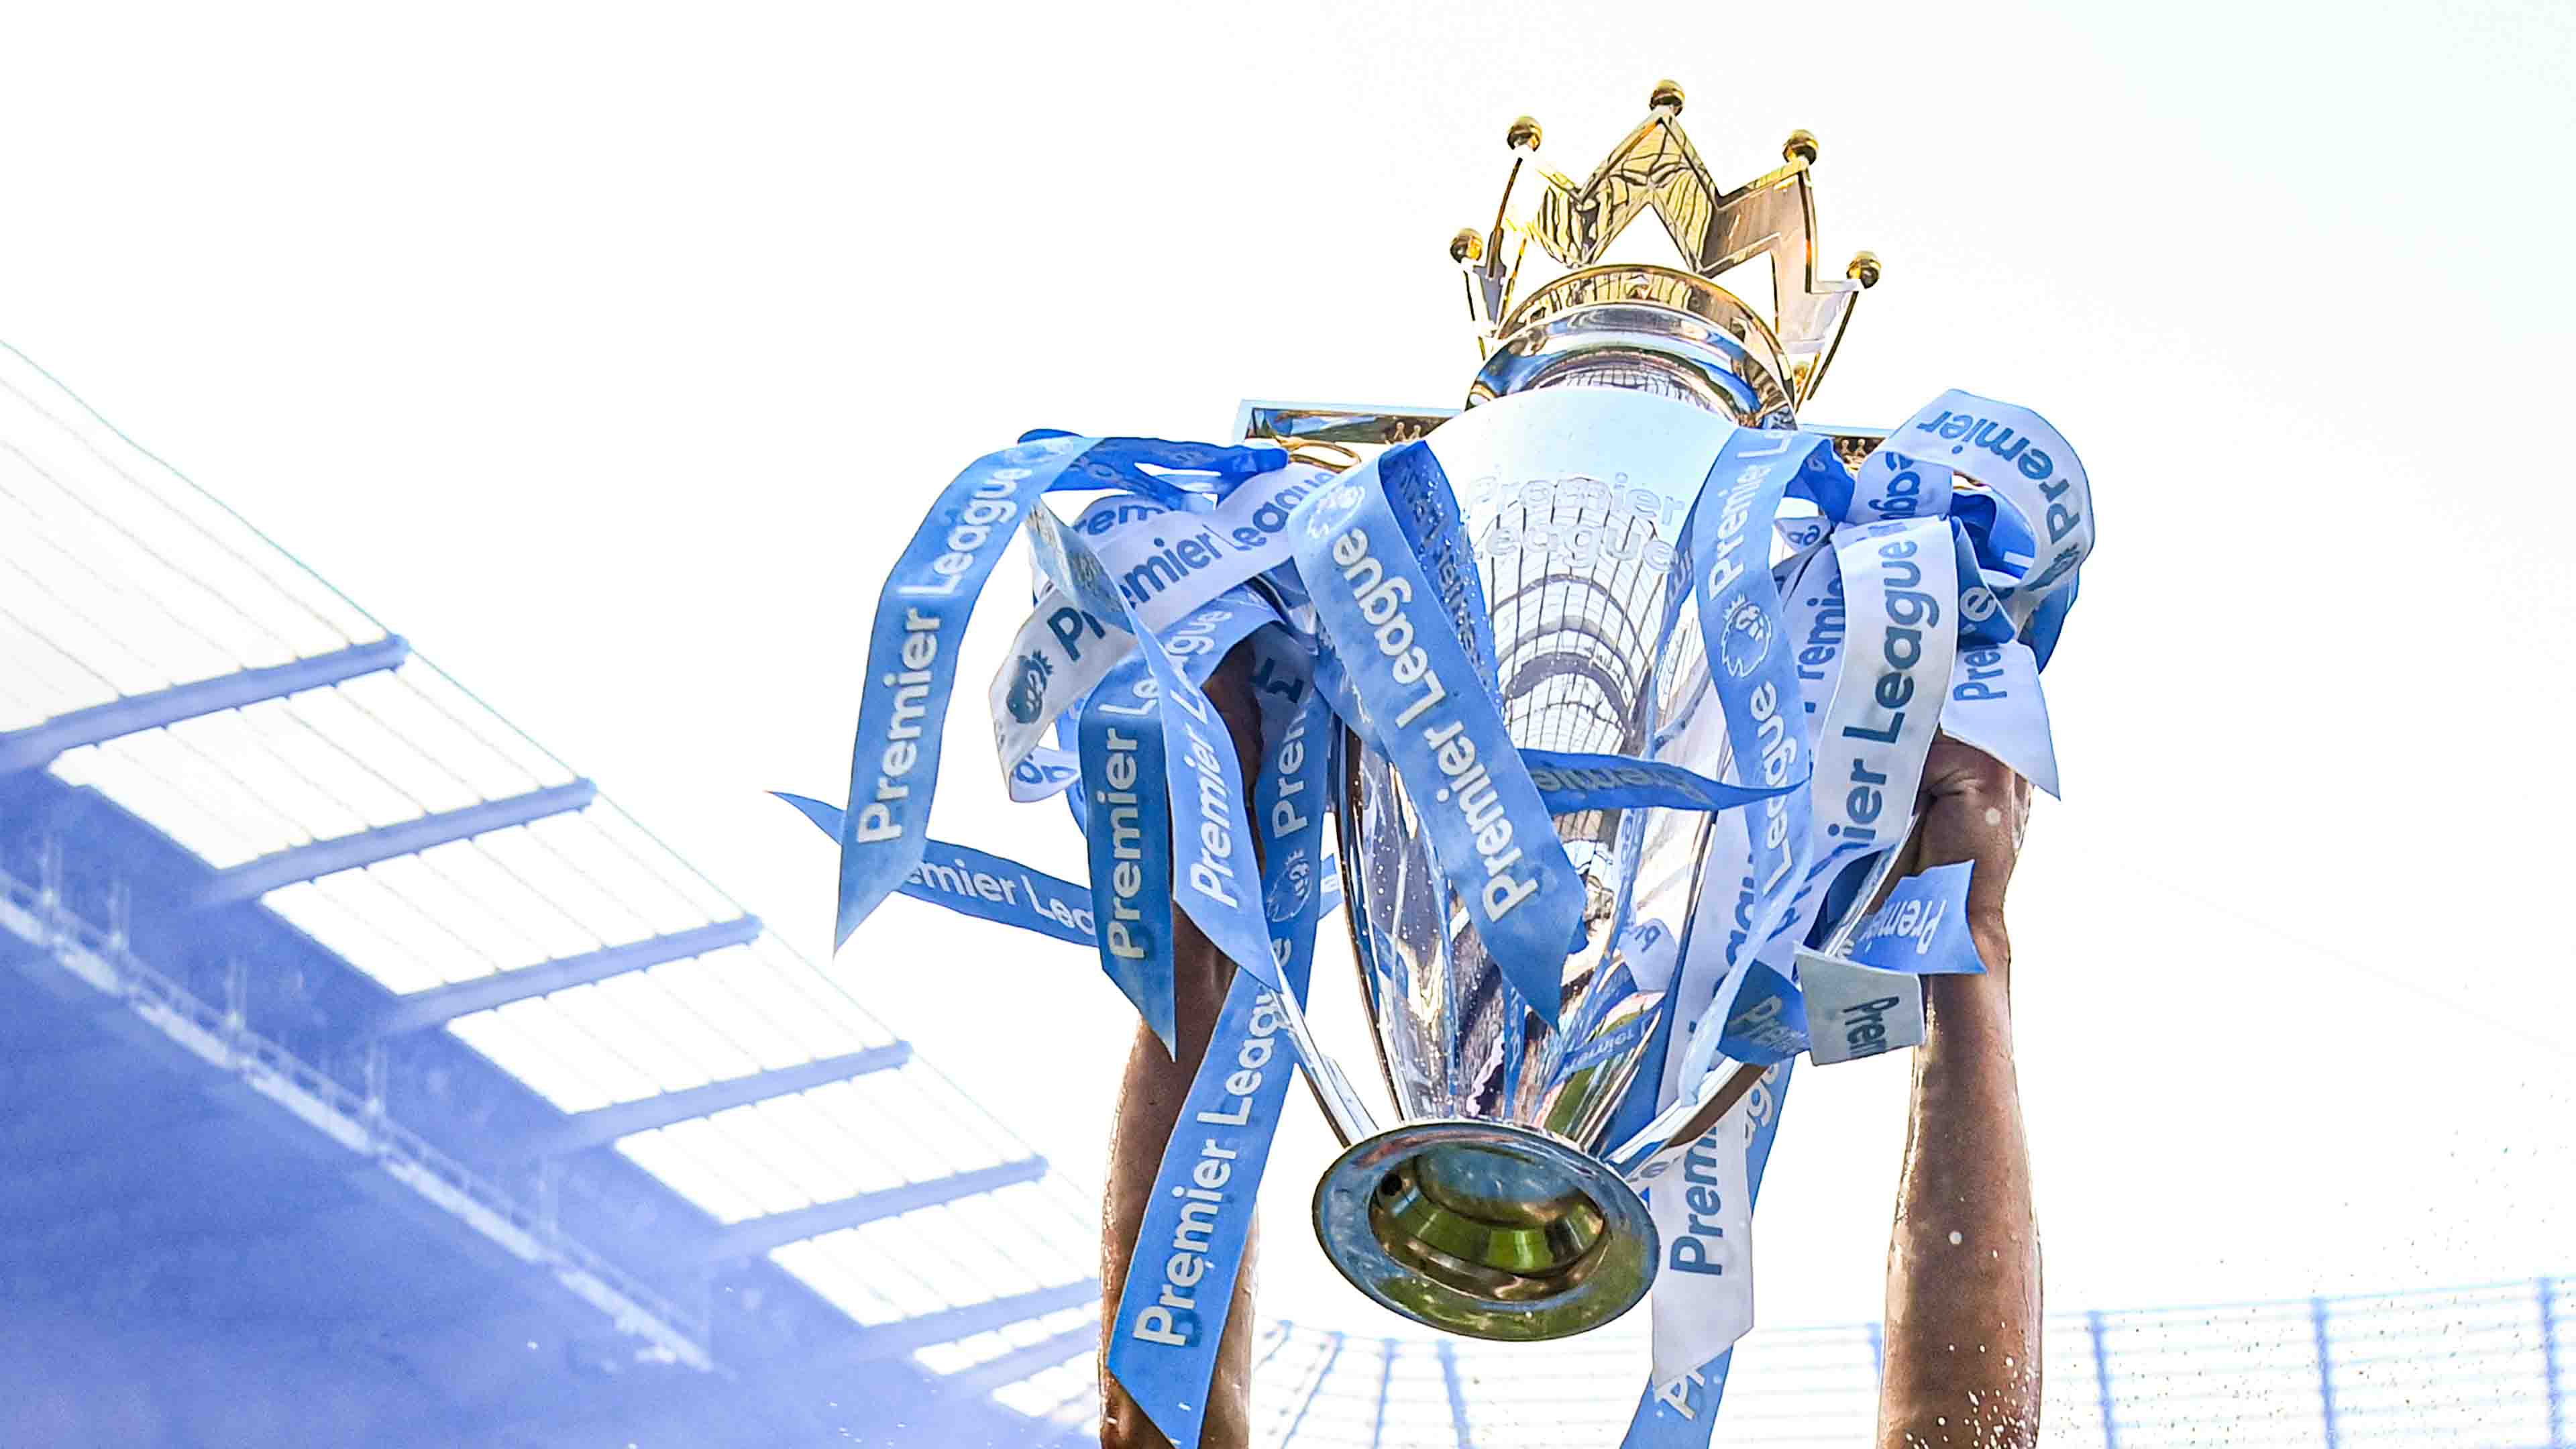 How To Watch The Premier League With Sling TV